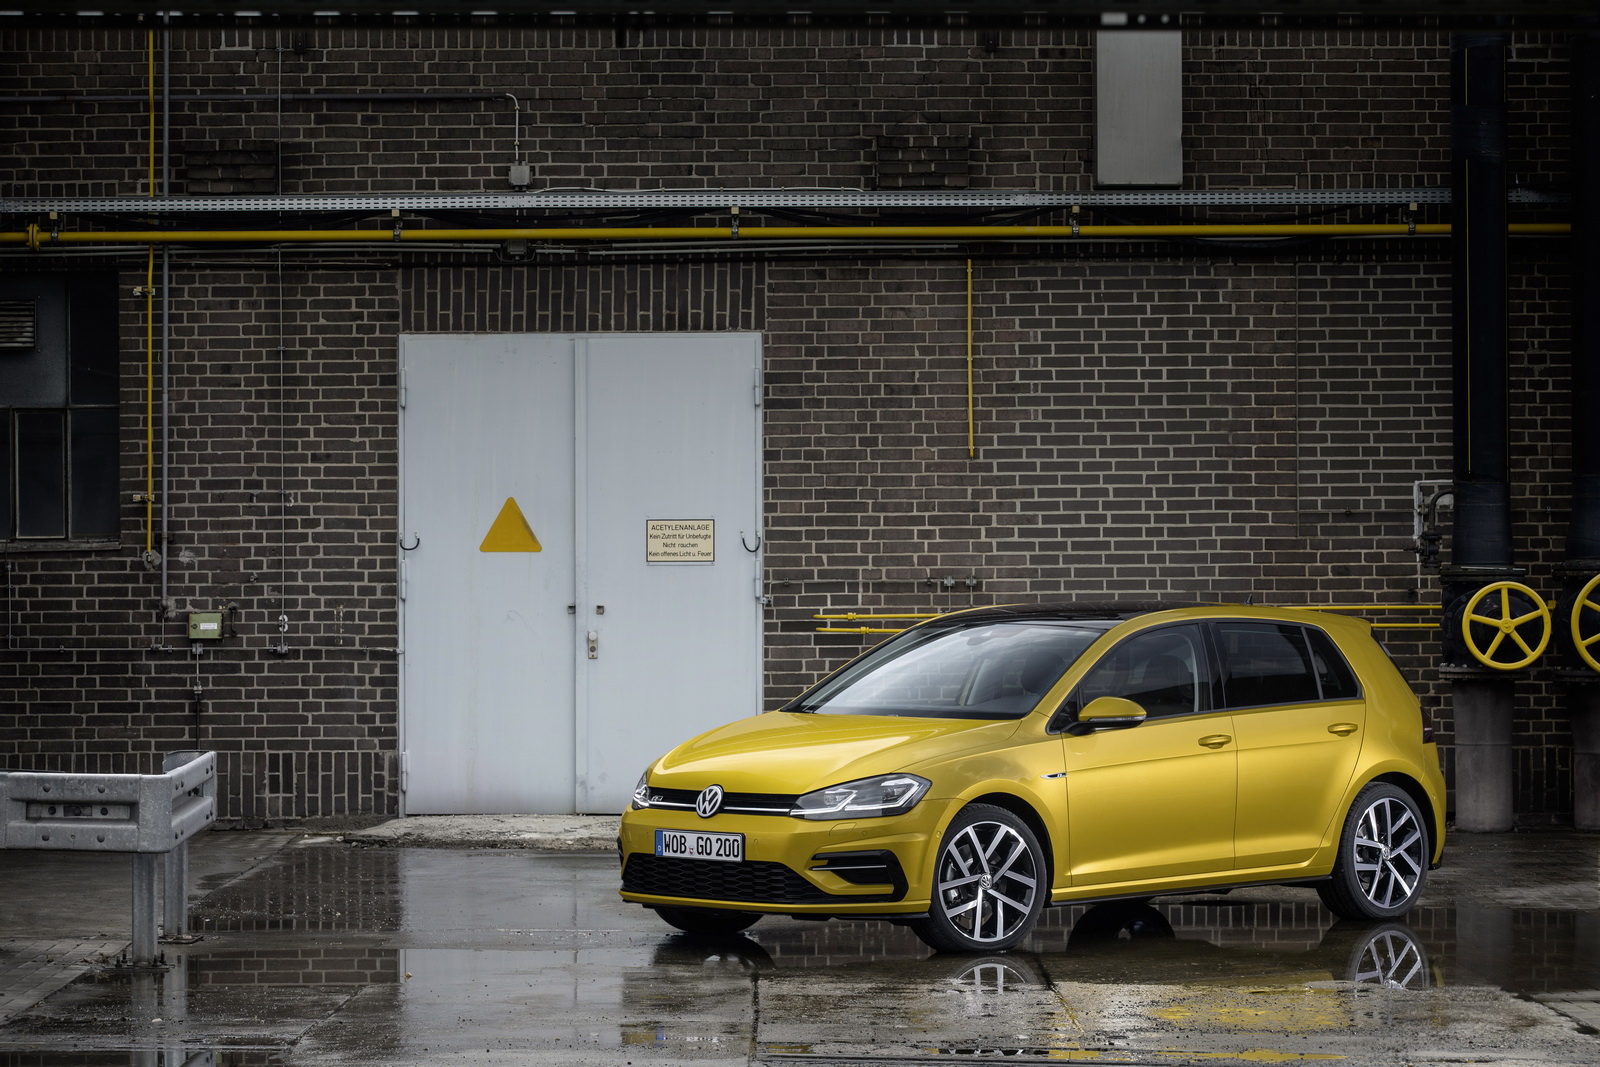 B&B Takes Entry-Level BMW 116i And Turns Into Into A Hot Hatch